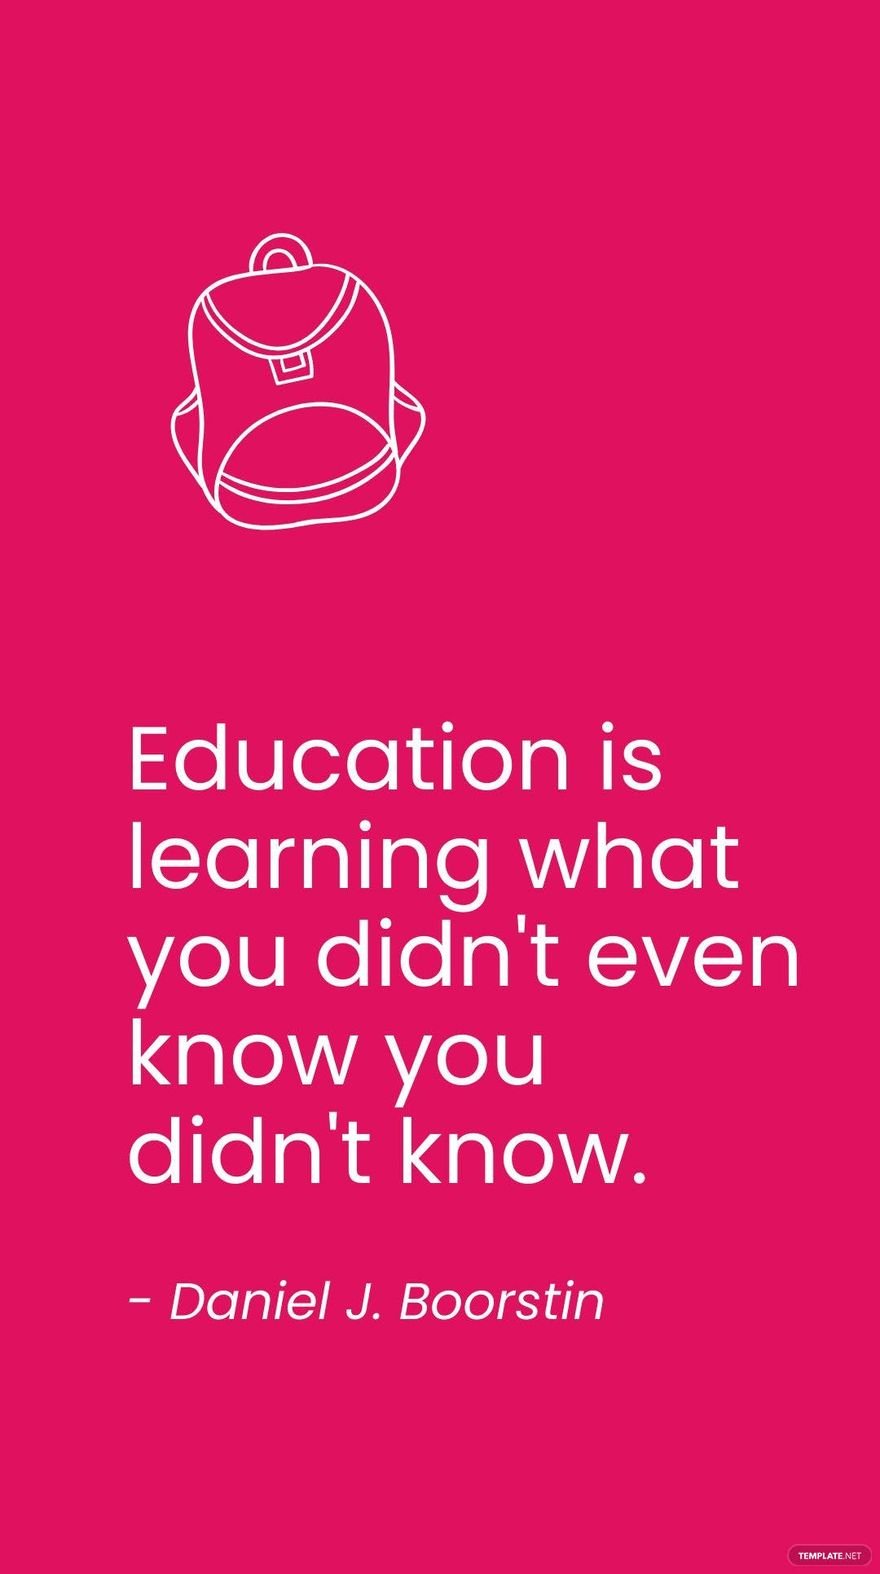 Daniel J. Boorstin - Education is learning what you didn't even know ...